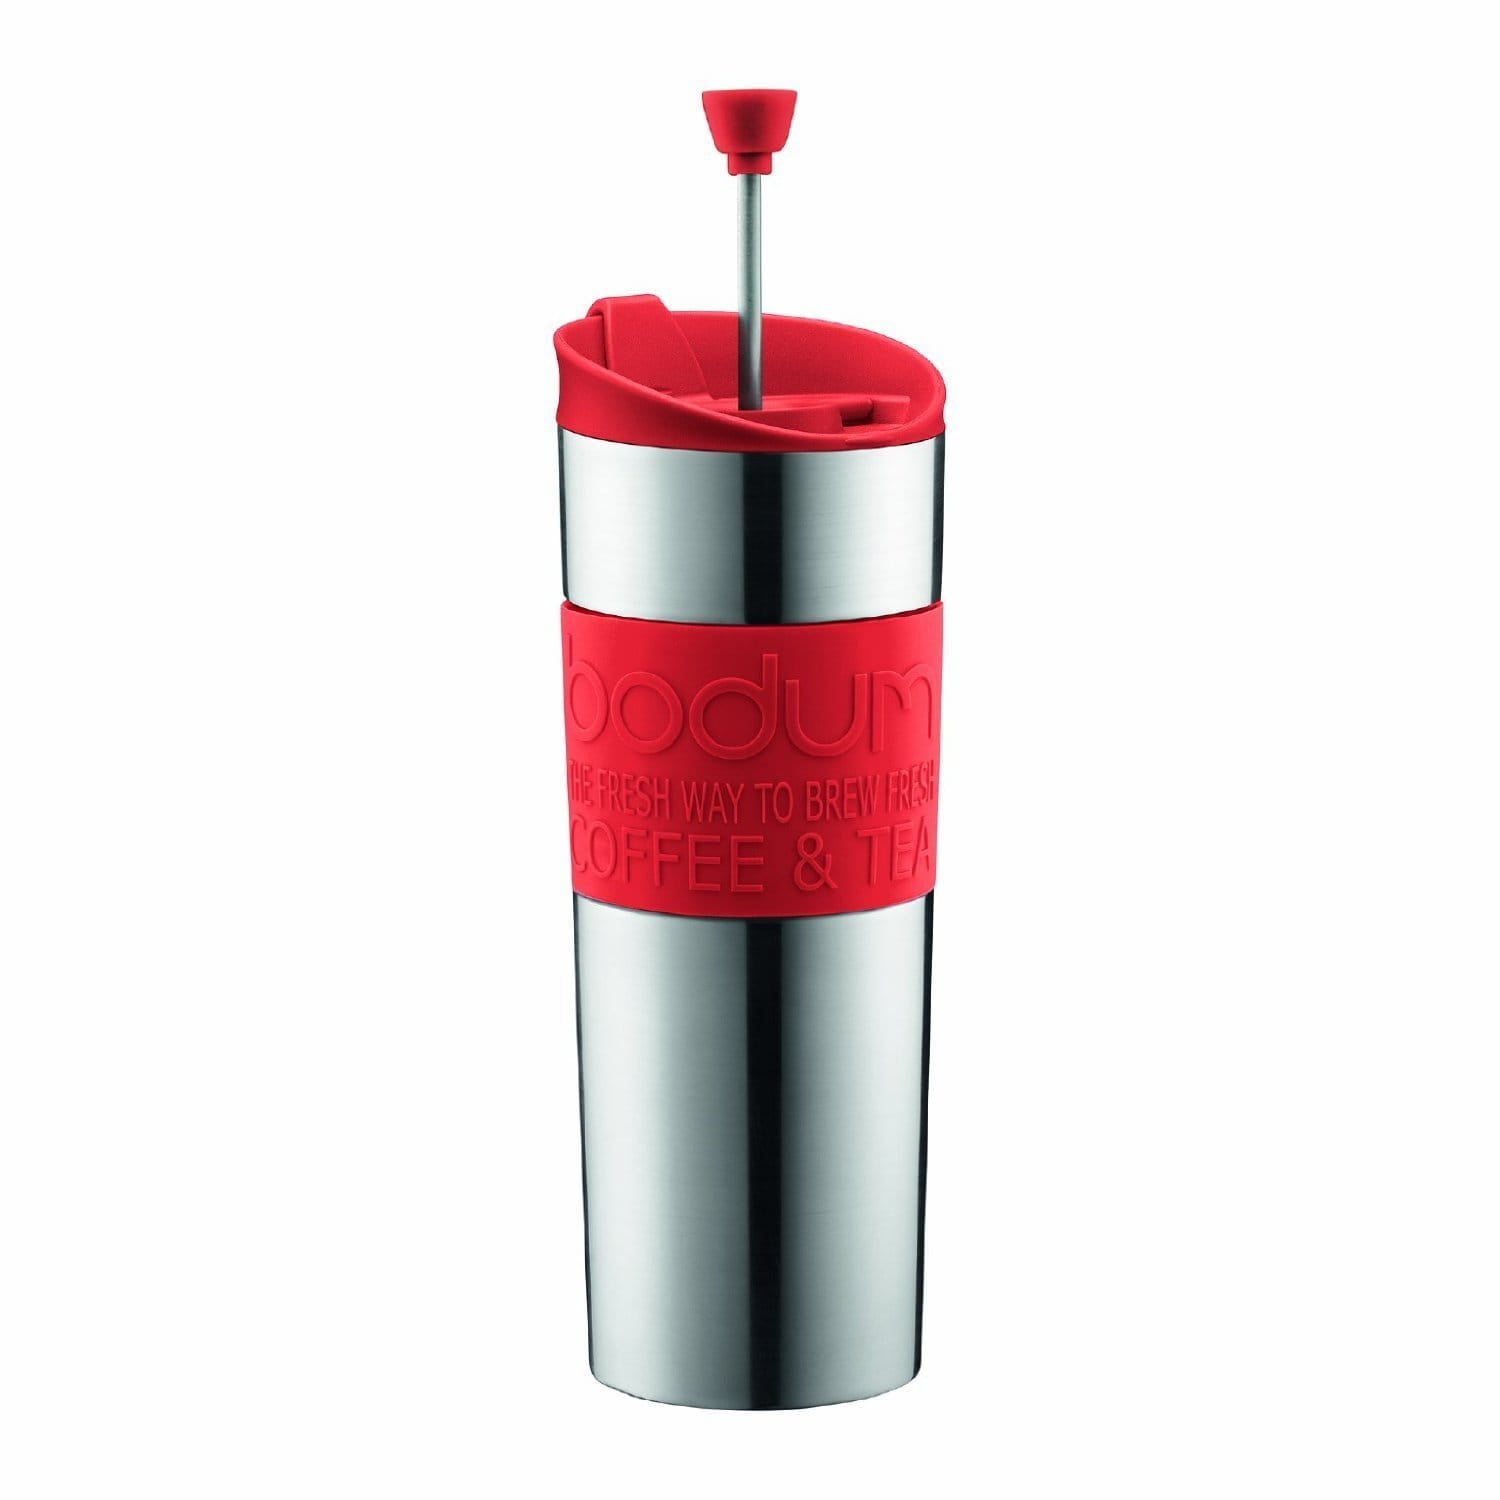 Bodum Columbia French Press, 12 Cup - Cupper's Coffee & Tea